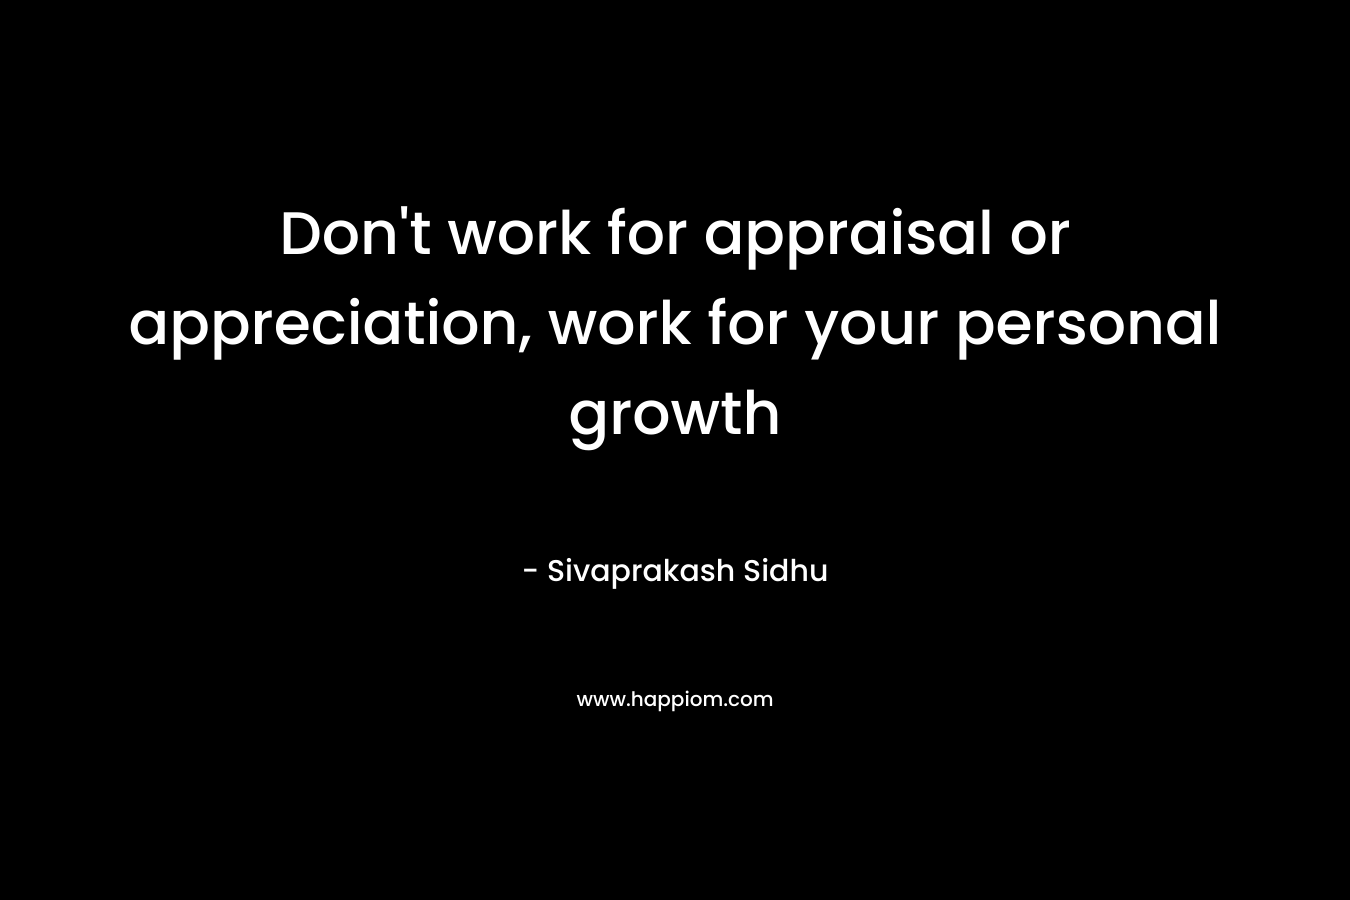 Don’t work for appraisal or appreciation, work for your personal growth – Sivaprakash Sidhu